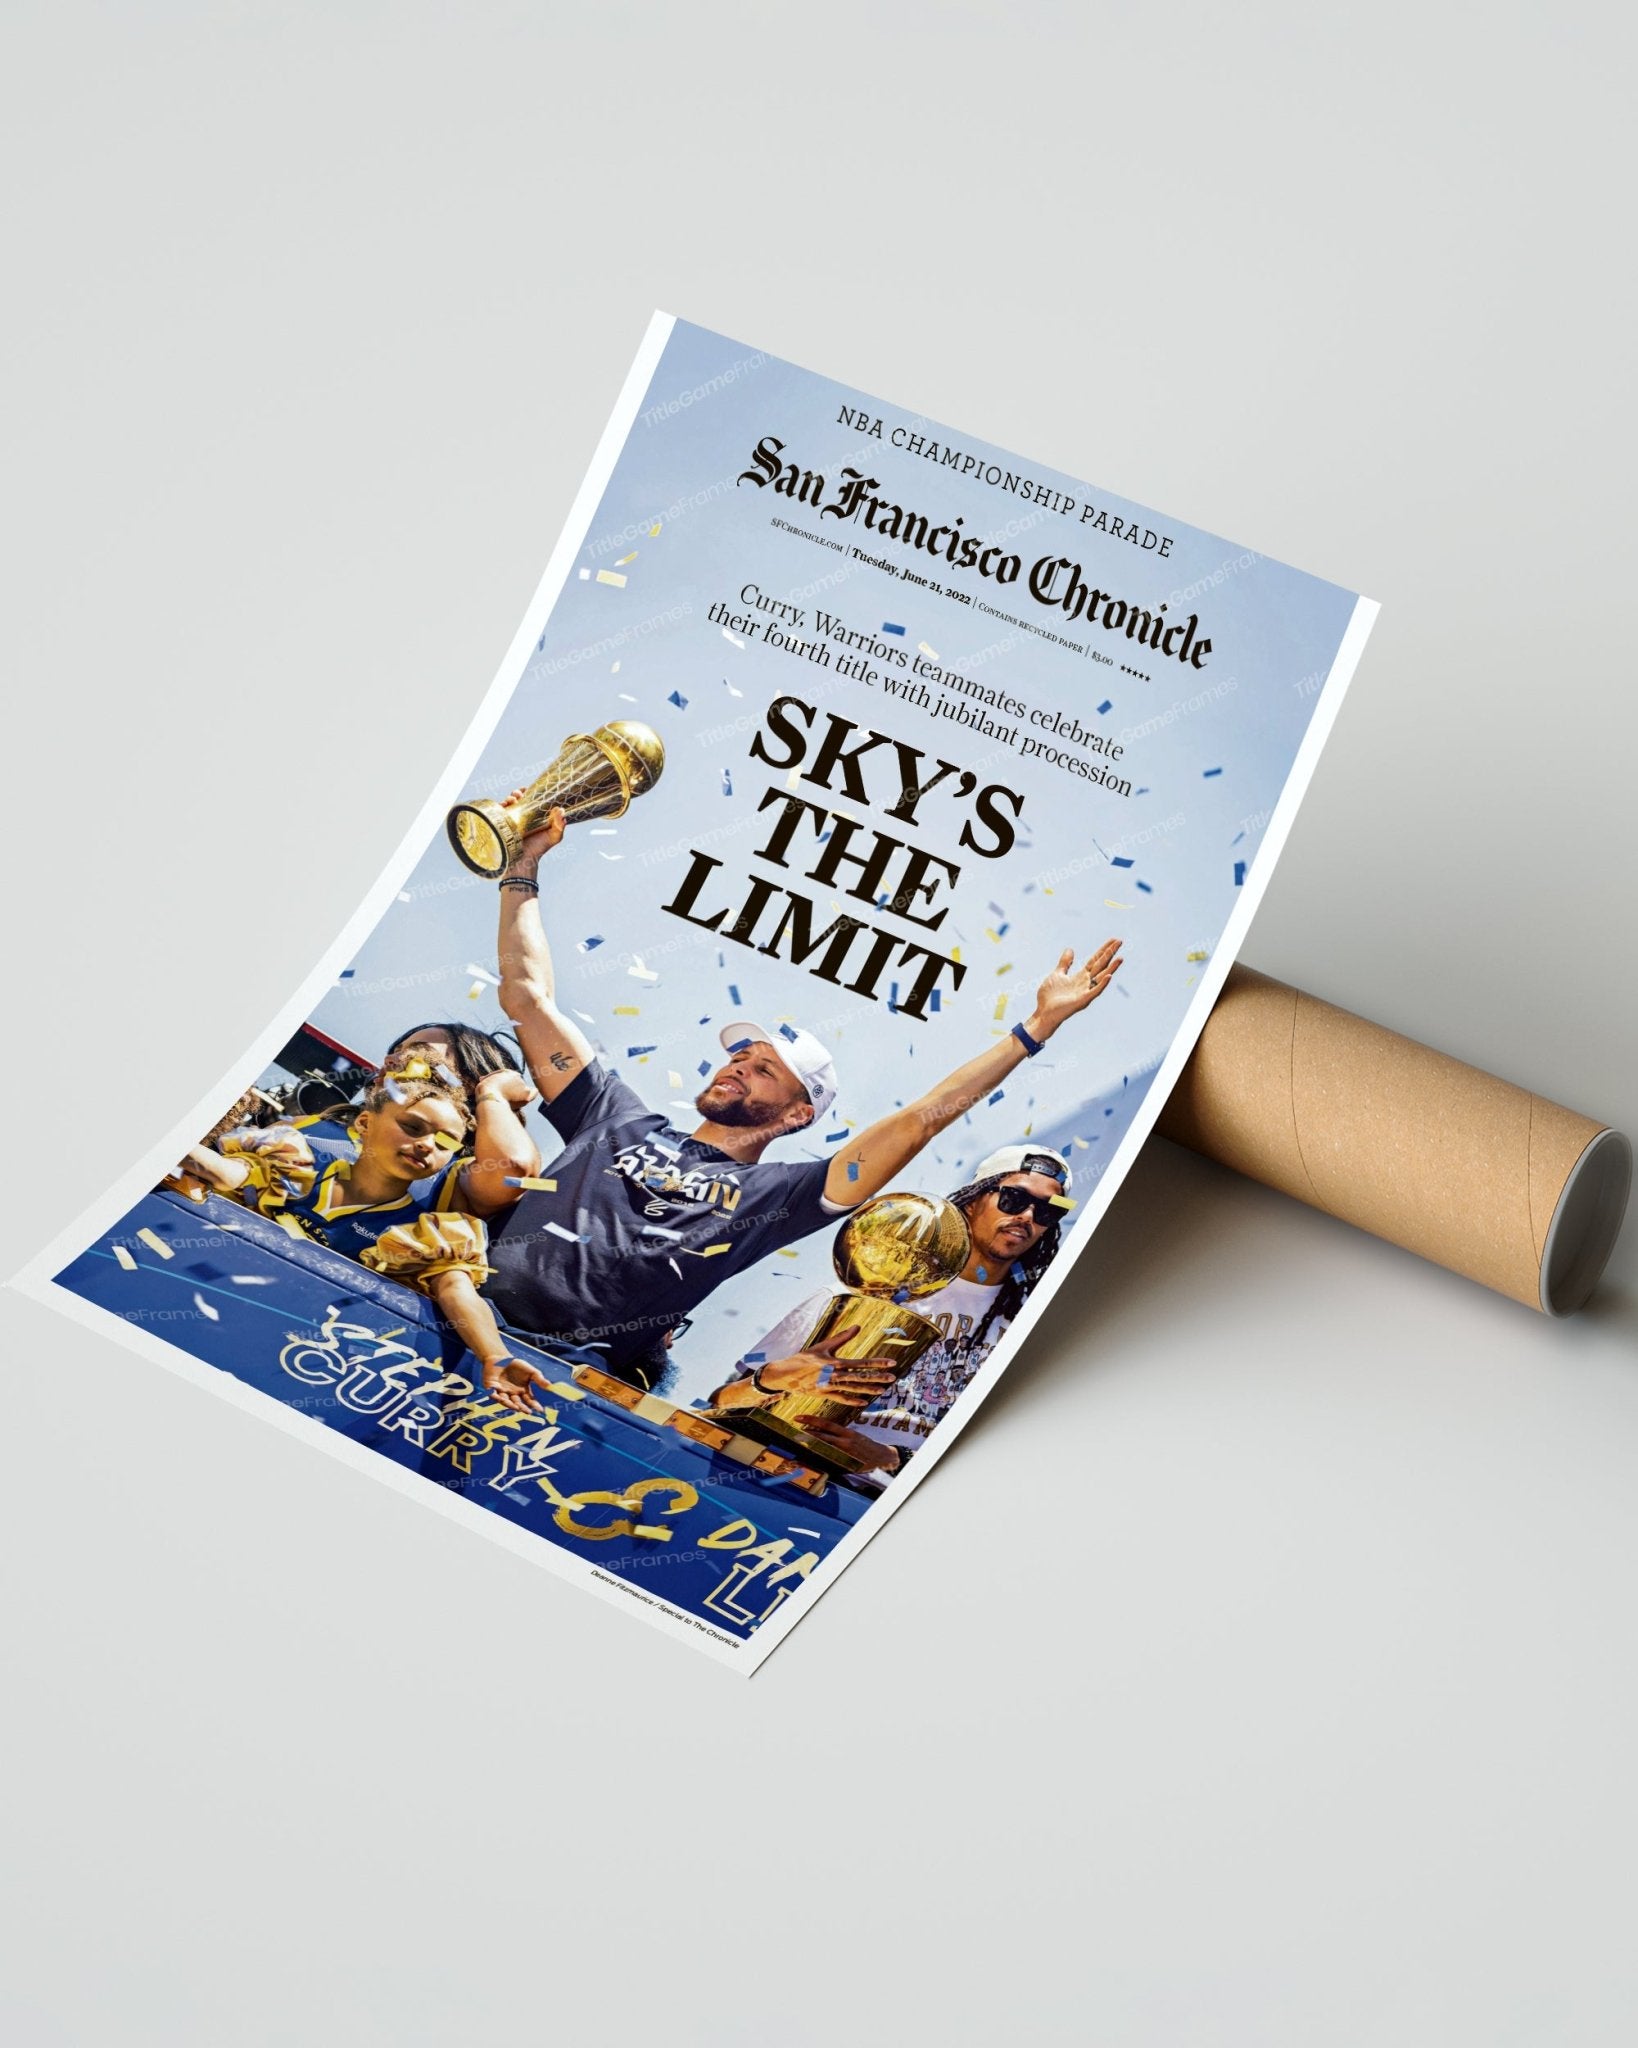 2022 Golden State Warriors “Sky’s The Limit” Parade NBA Champions Framed Front Page Newspaper Print - Title Game Frames